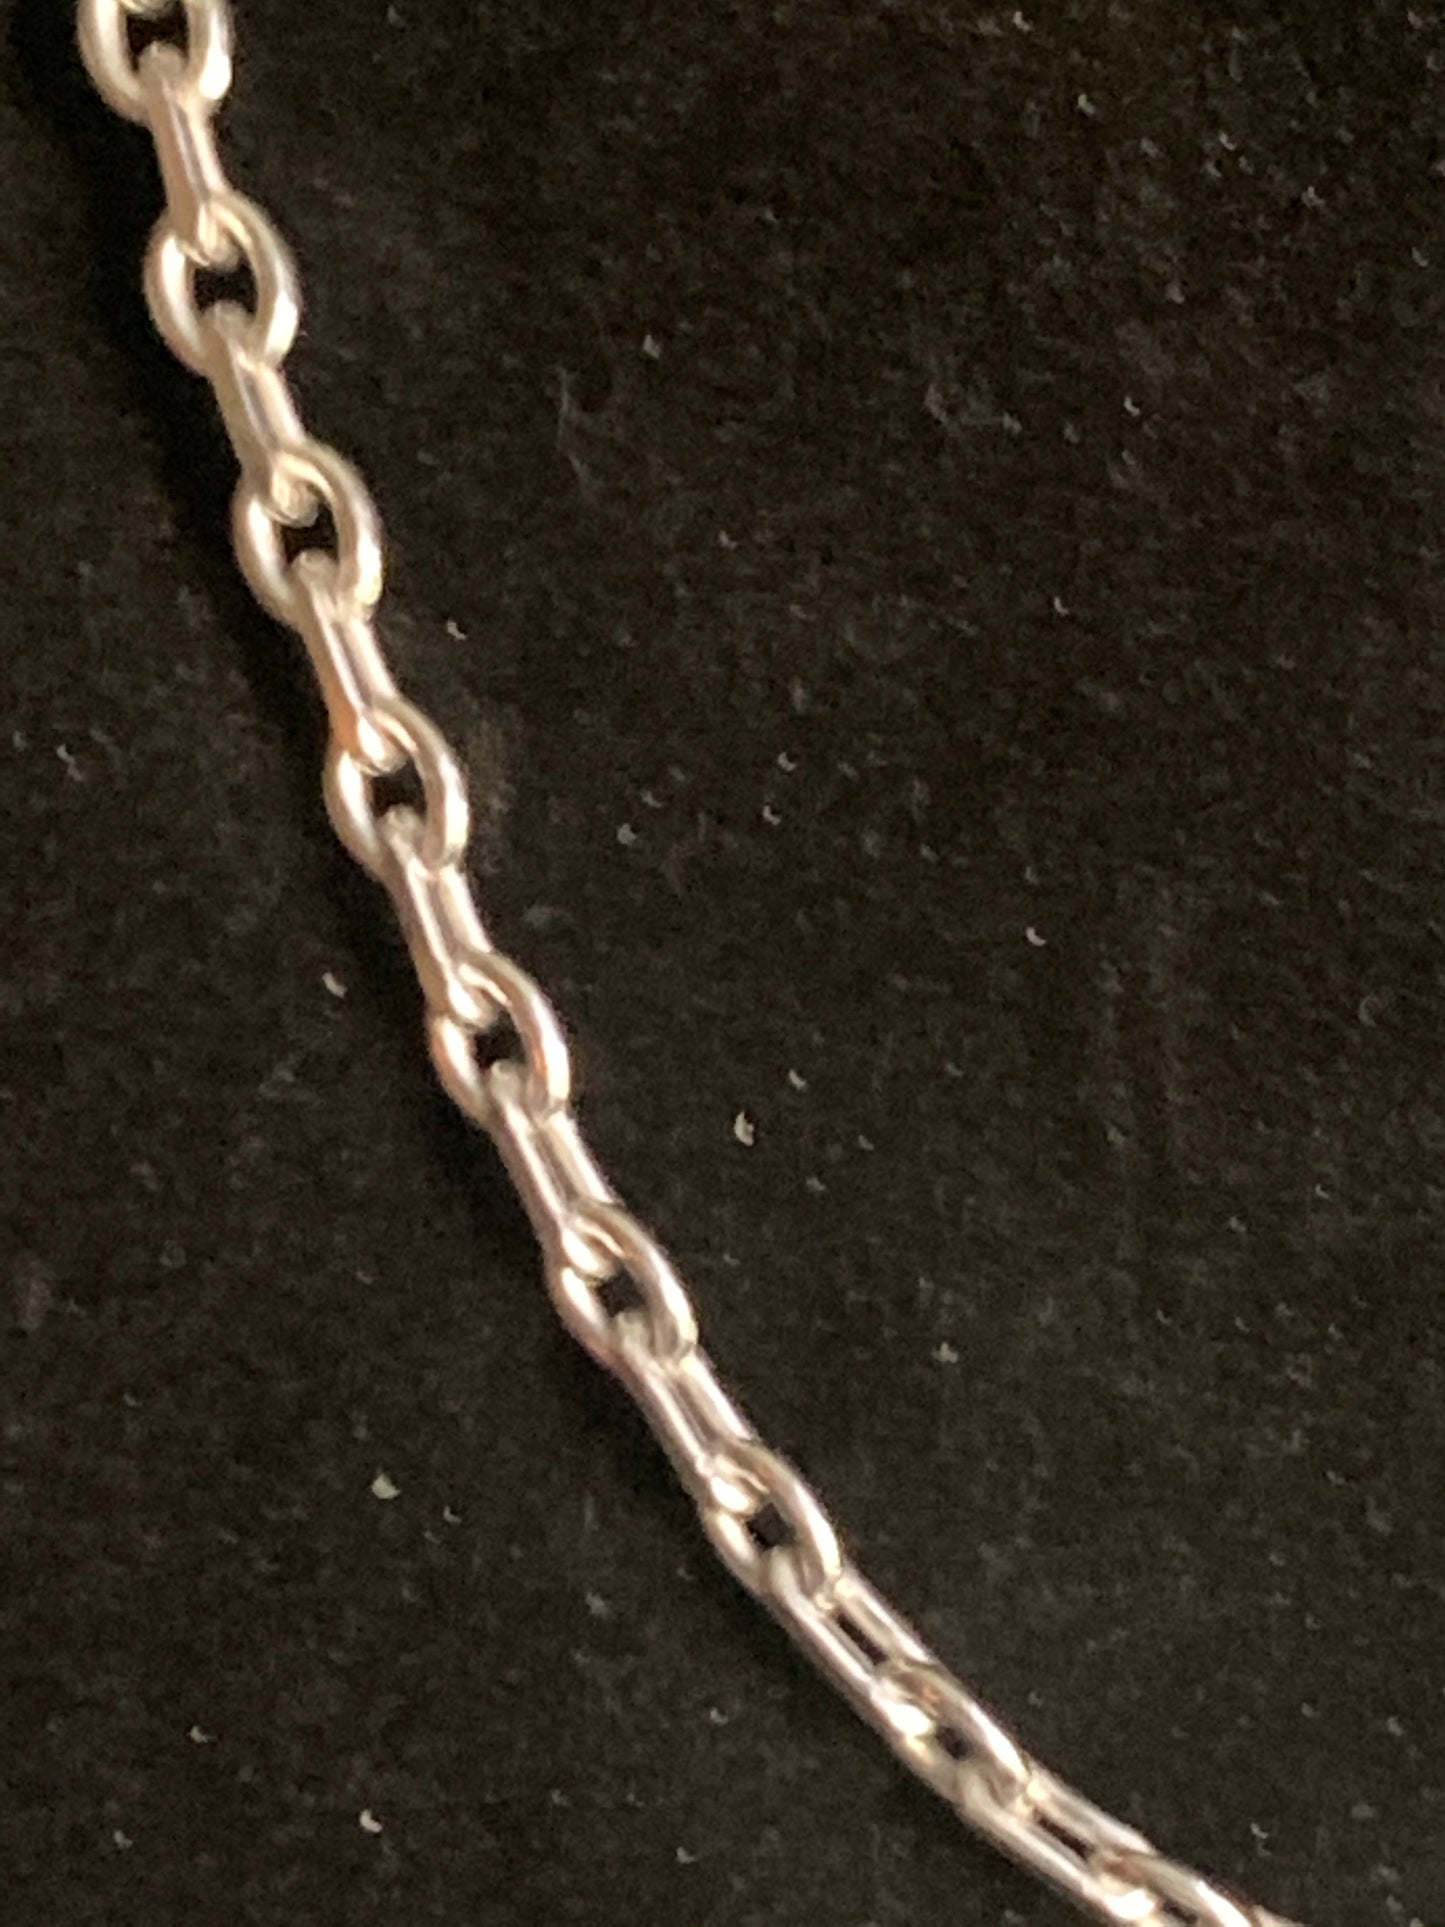 A silver chain necklace